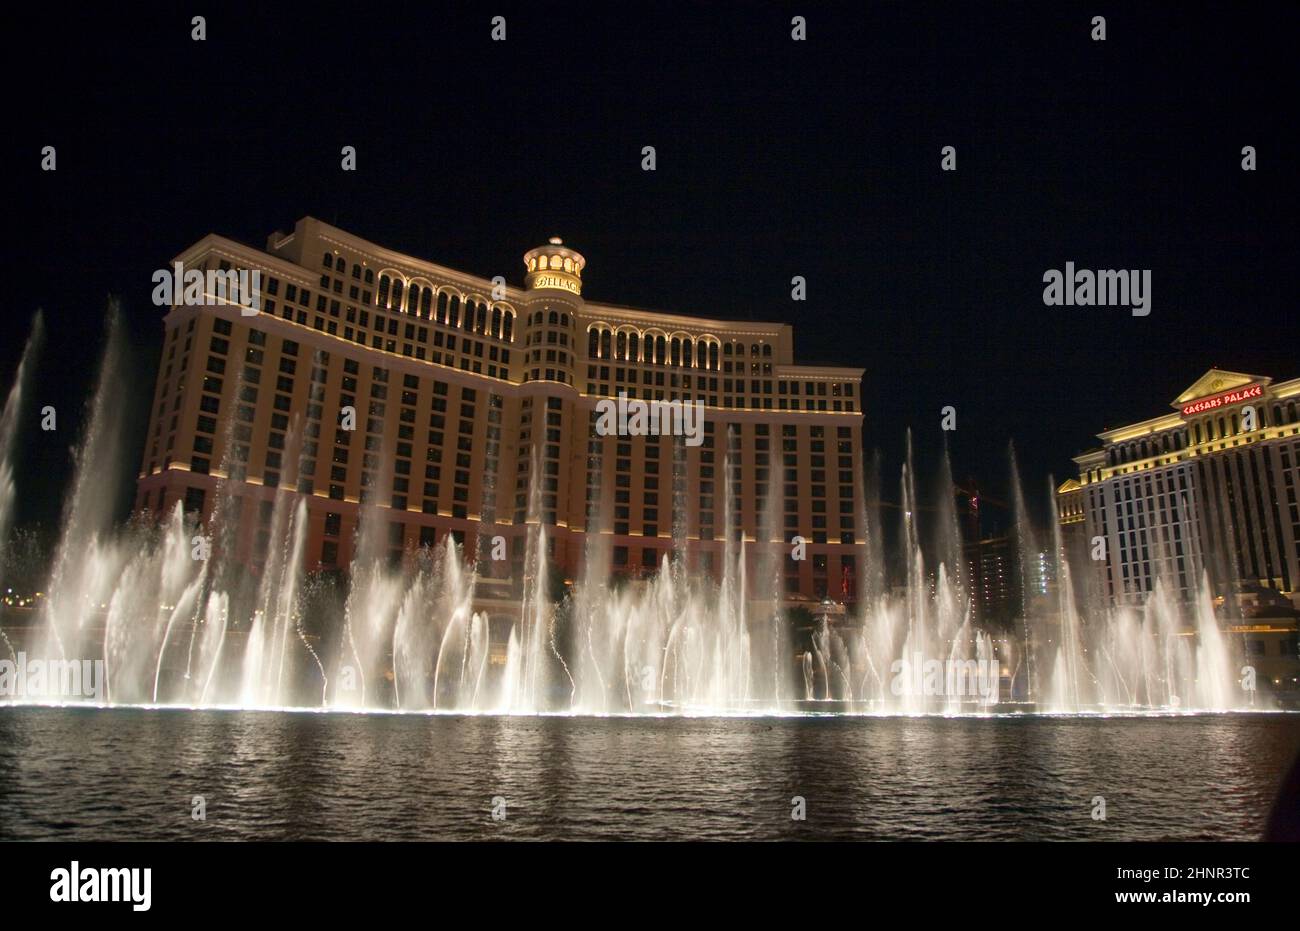 Las Vegas Bellagio Hotel Casino, featured with its world famous fountain show Stock Photo